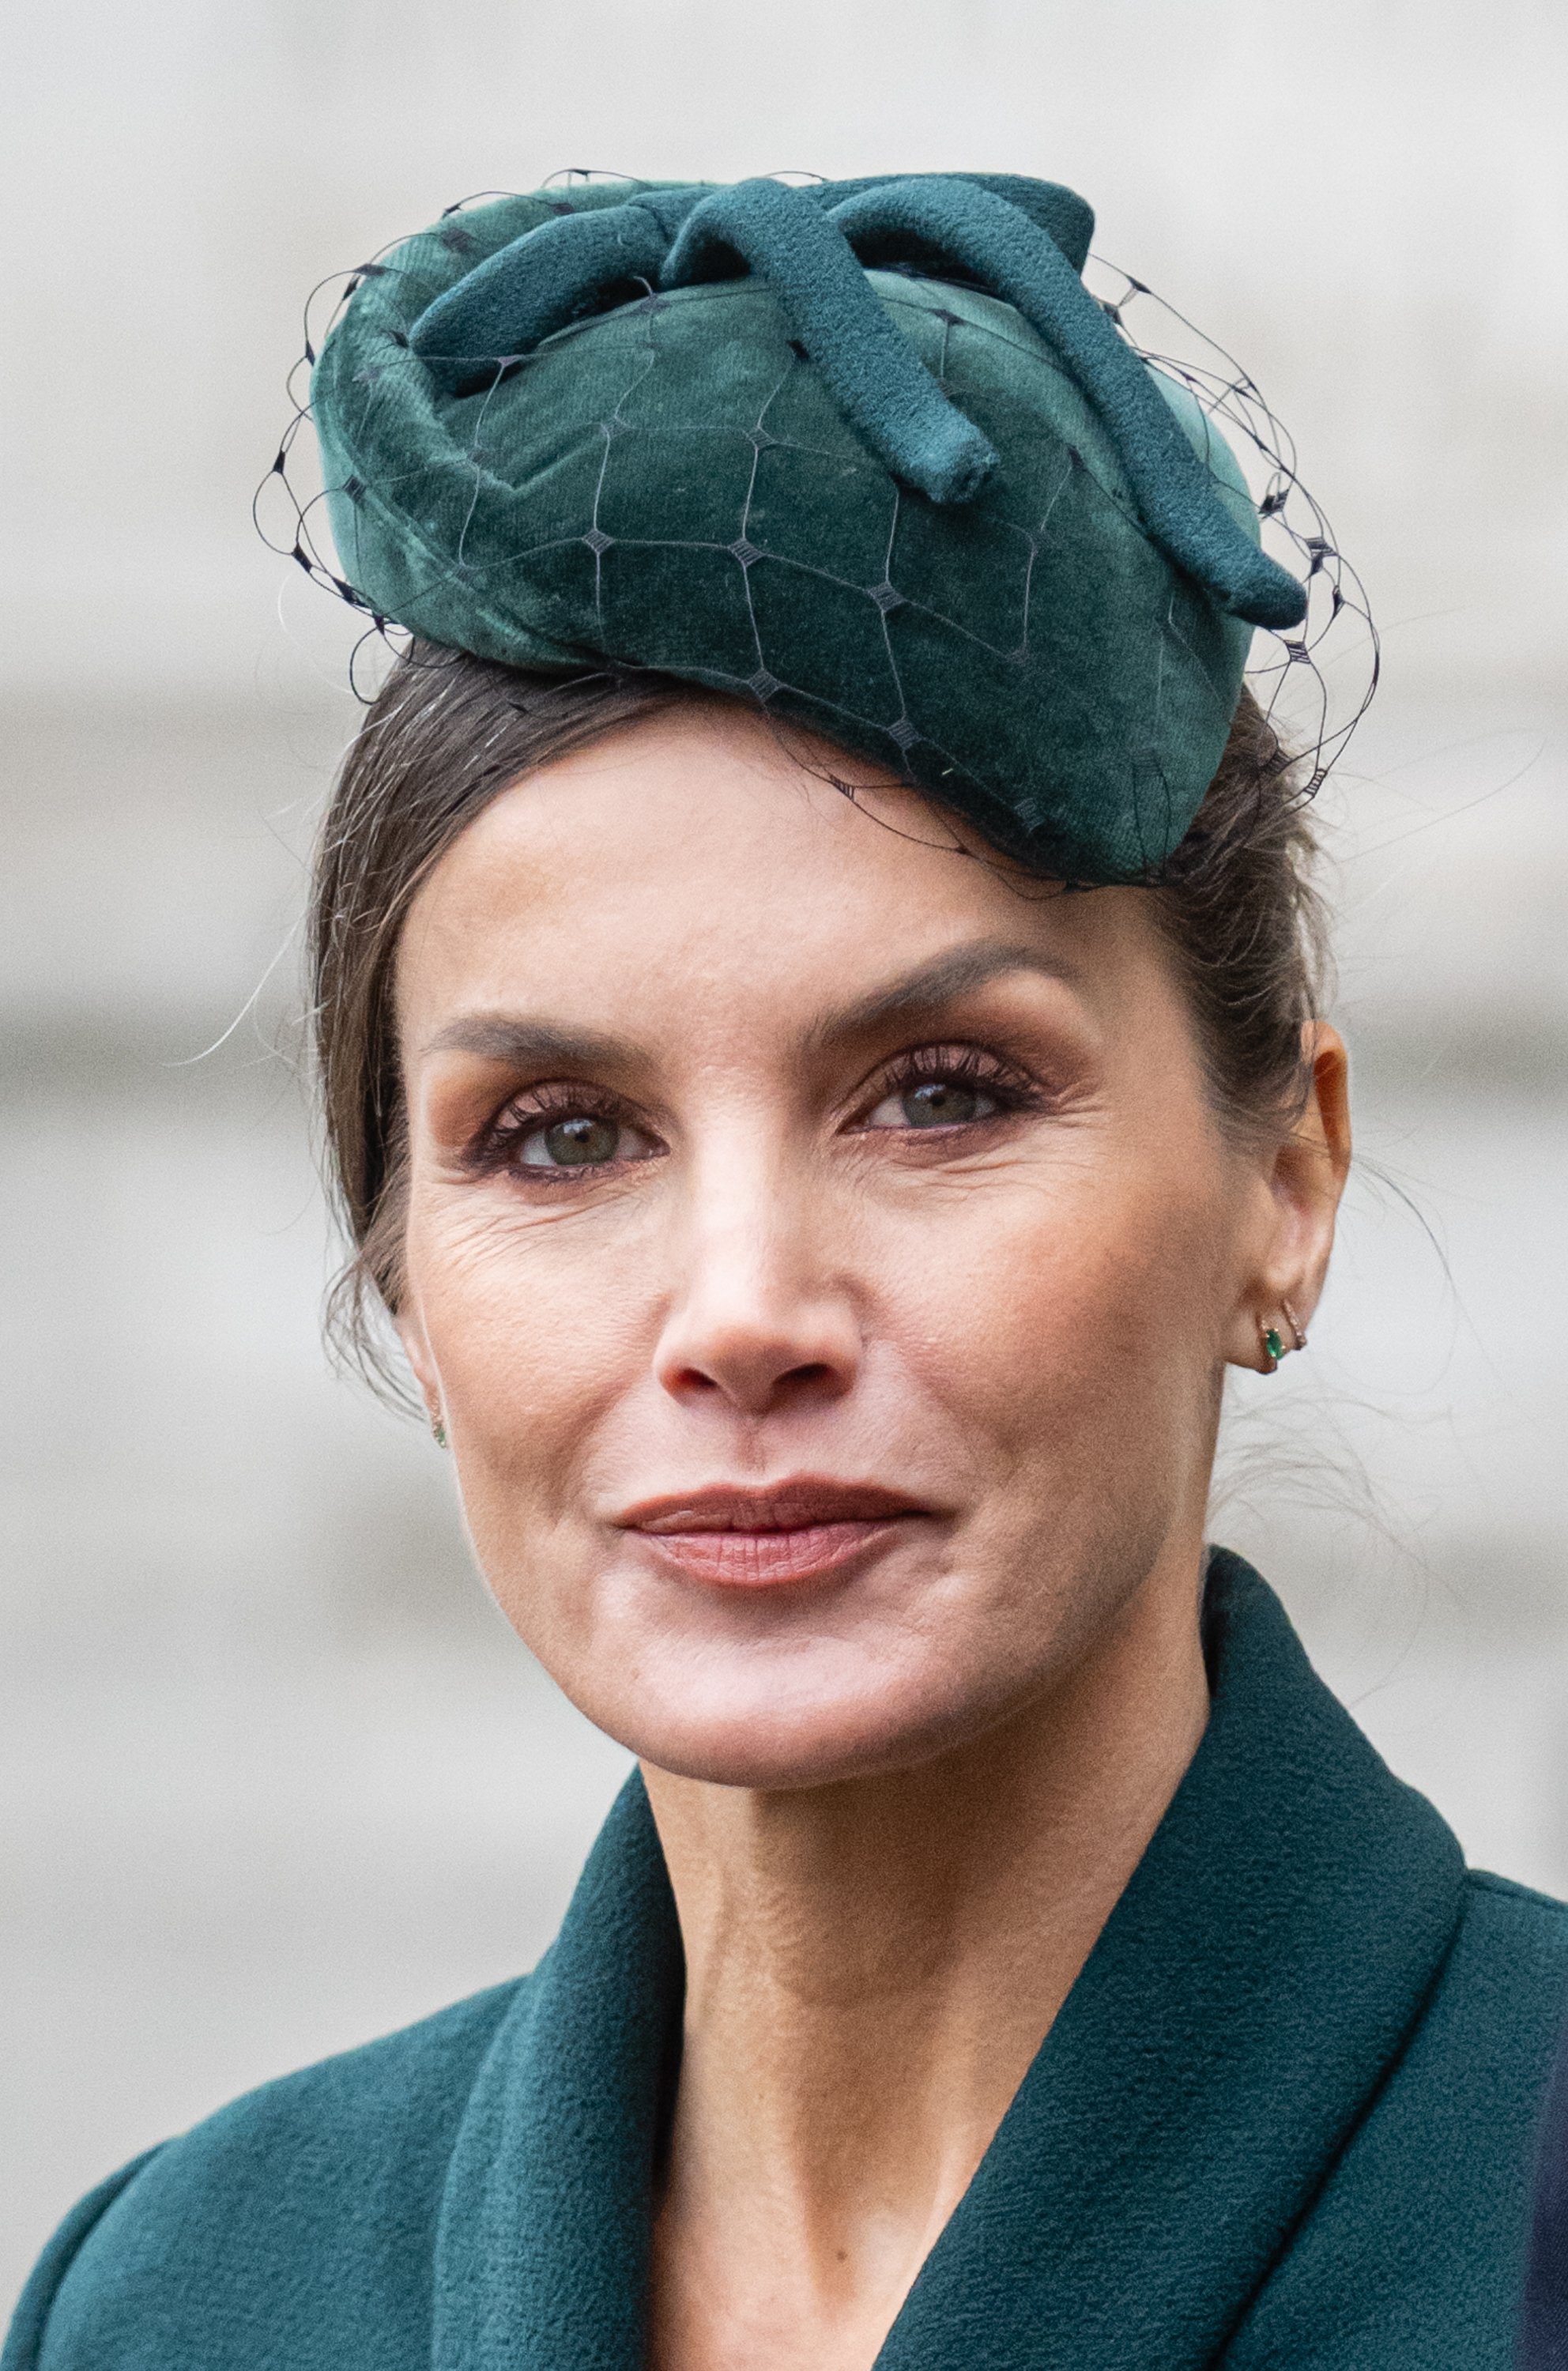 Queen Letizia of Spain during a memorial service for the Duke of Edinburgh at Westminster Abbey on March 29, 2022 in London, England. / Source: Getty Images